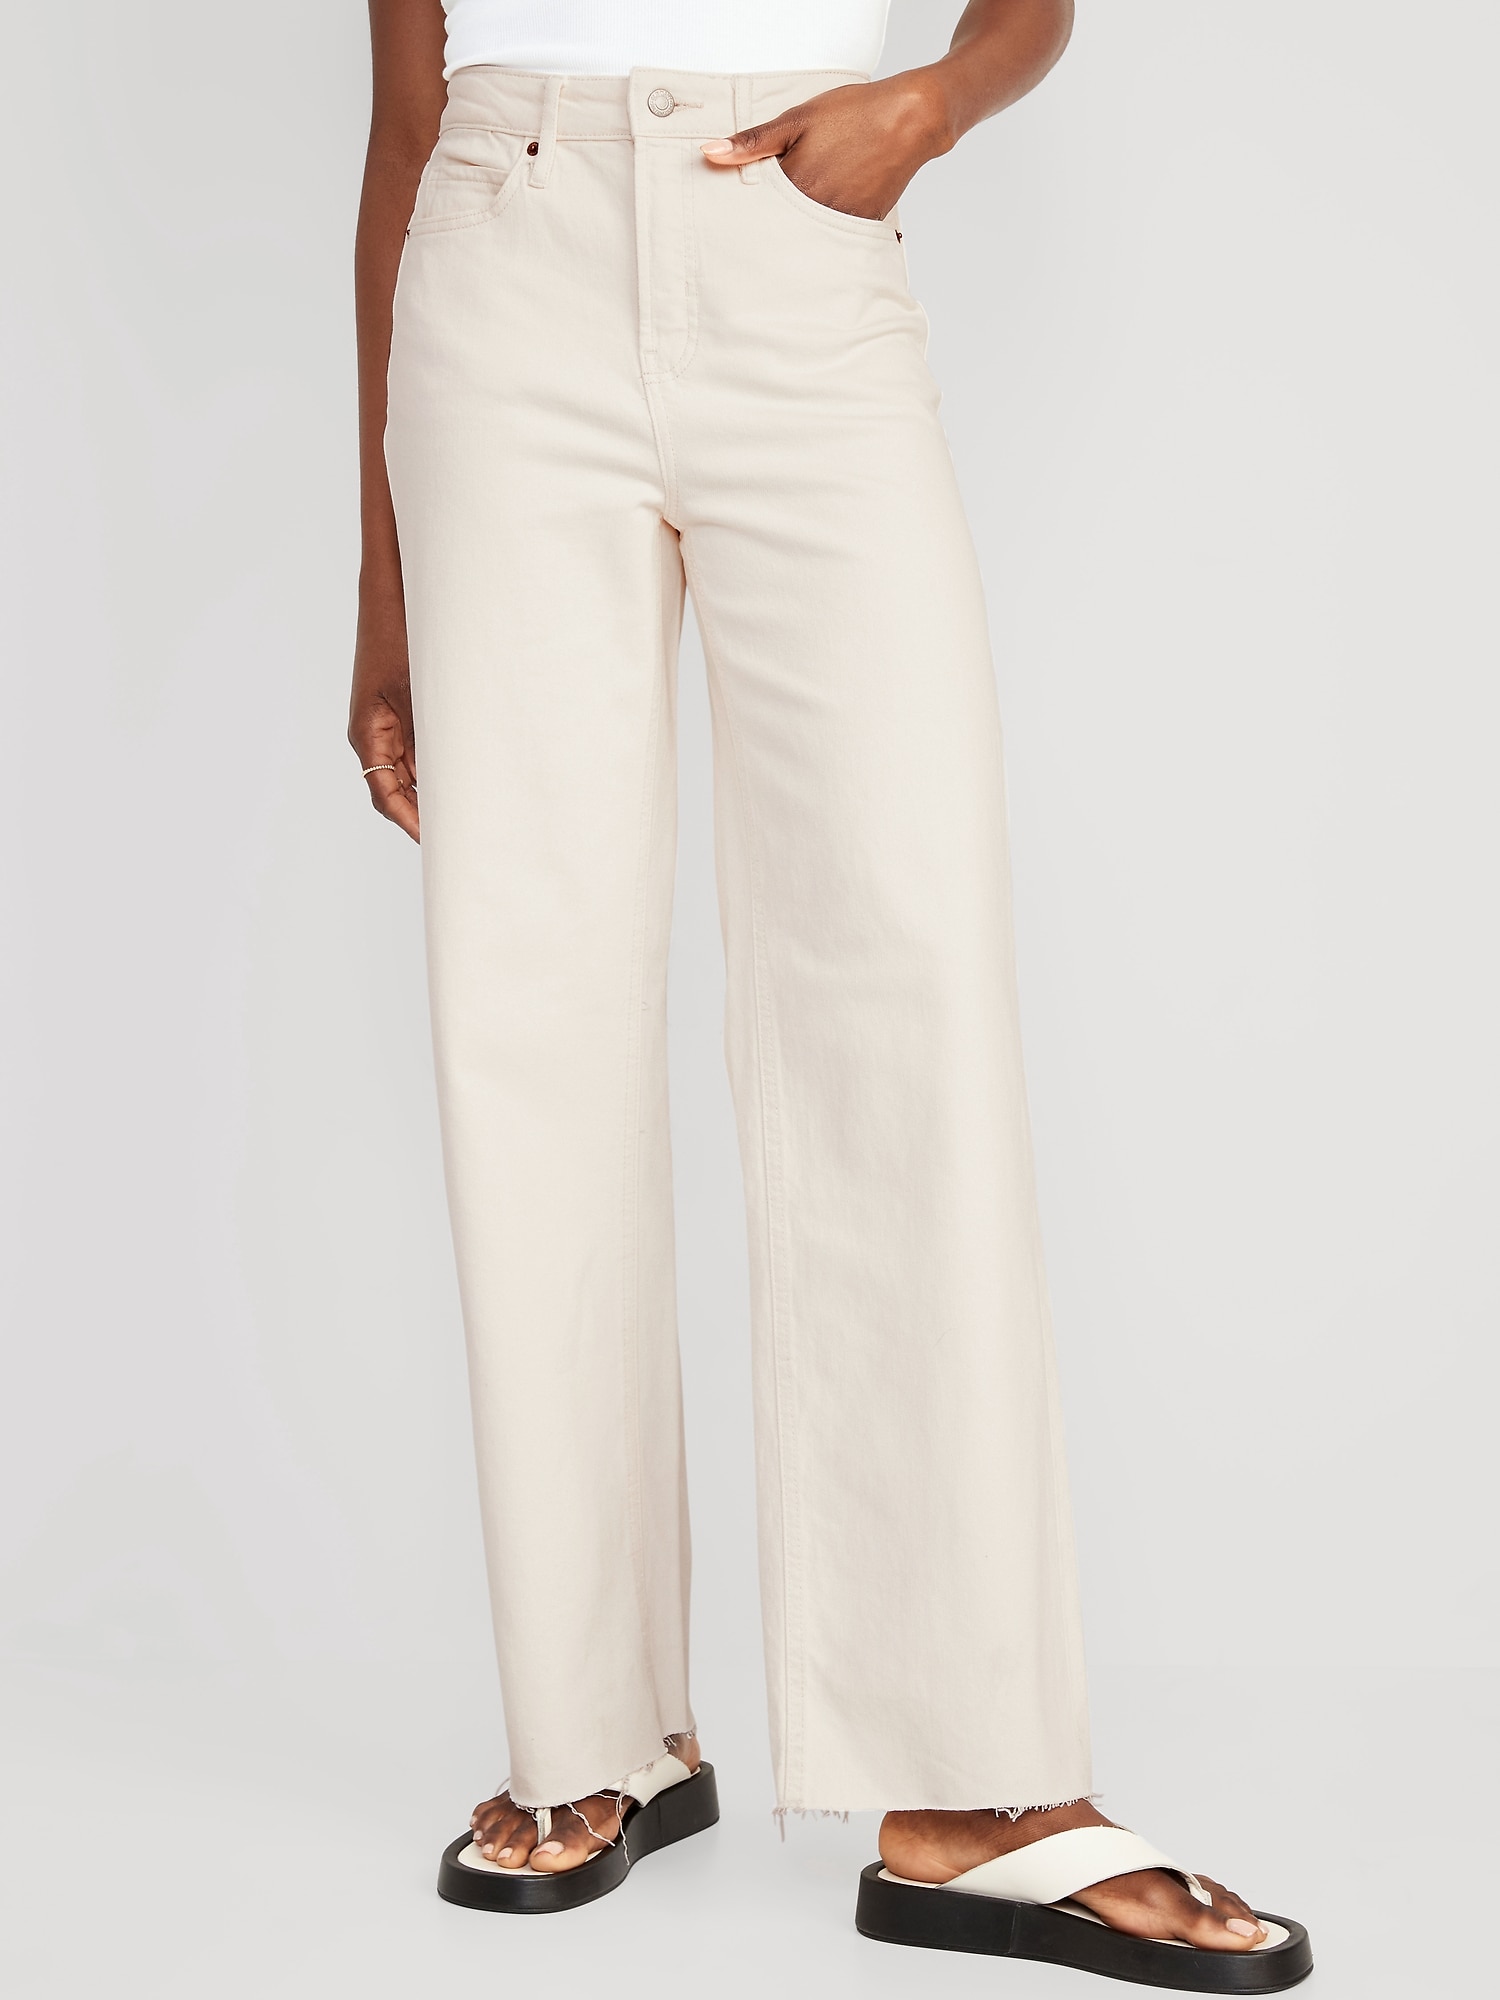 White/Ecru Jeans + Pants for Spring.